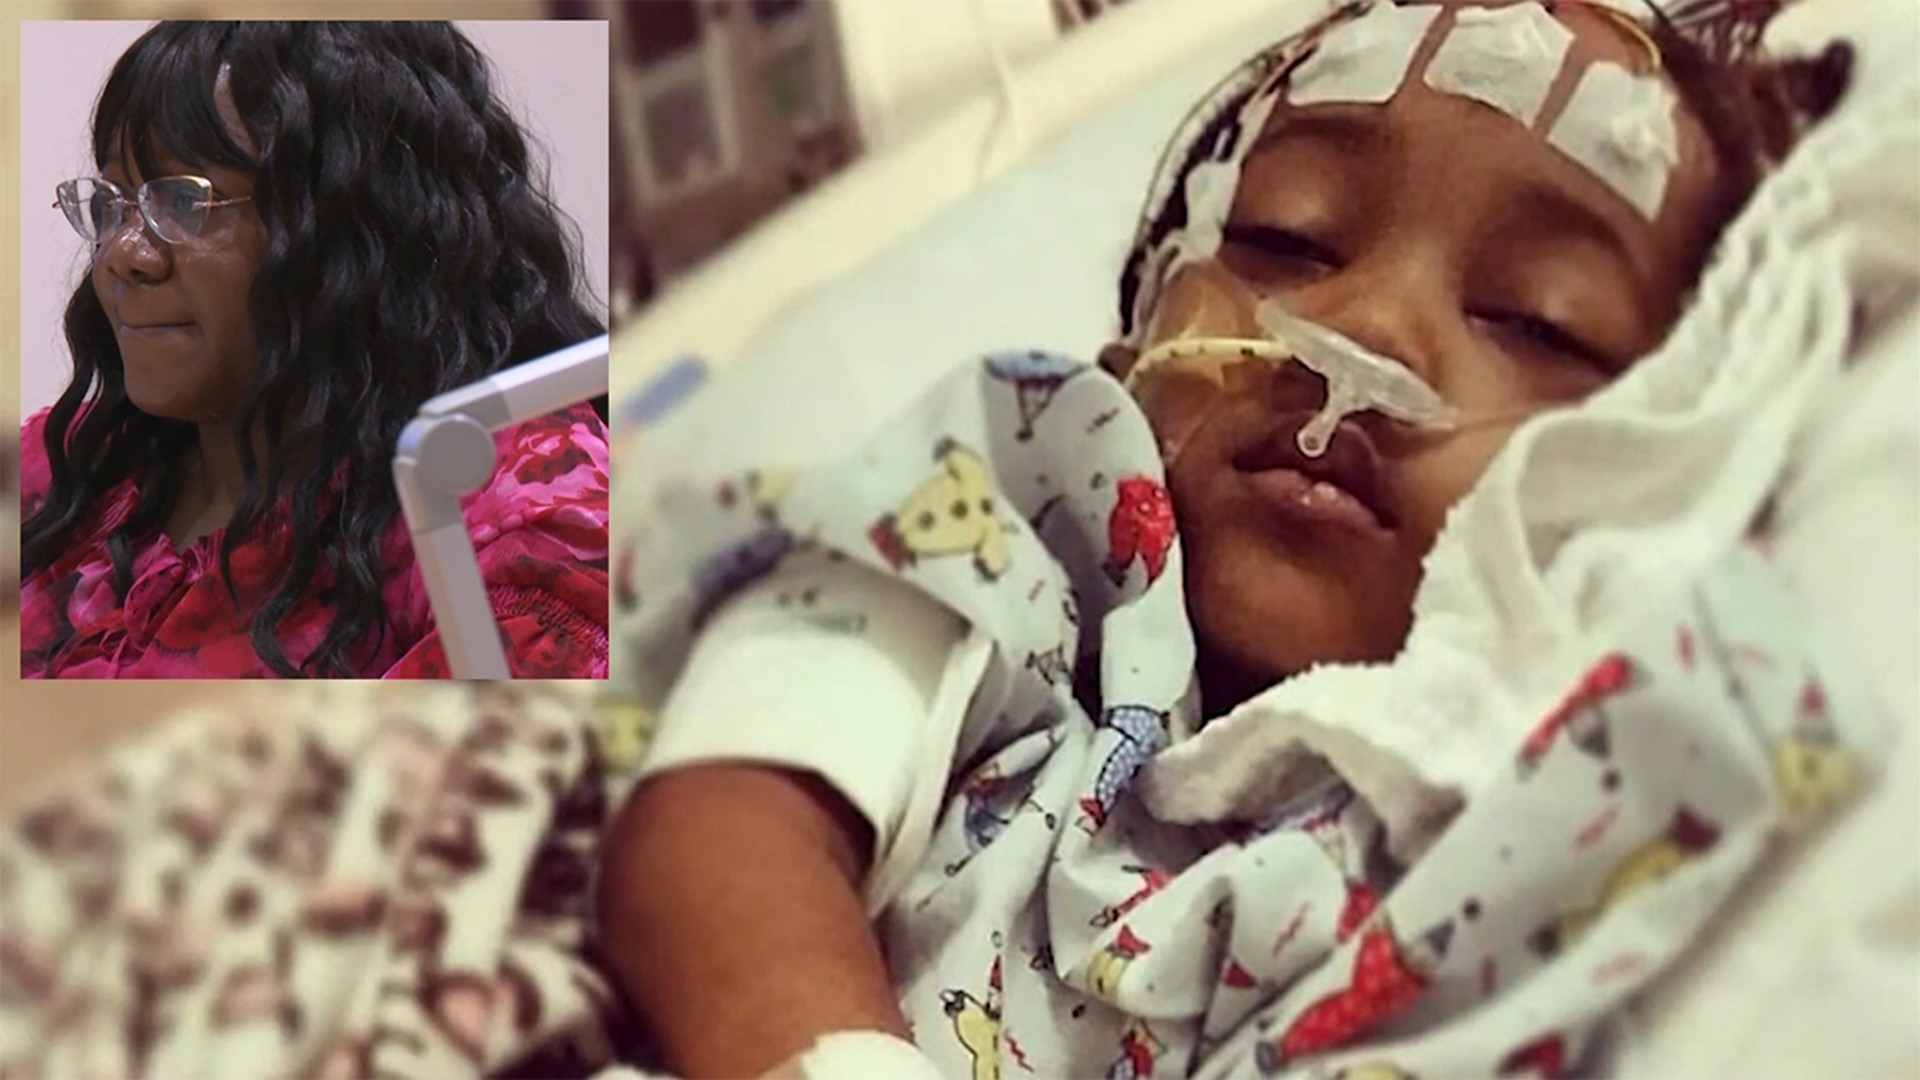 Bethaniel Jefferson had been facing up to 20 years in prison after 4-year-old Nevaeh Hall ended up with permanent brain damage during a 2016 procedure.